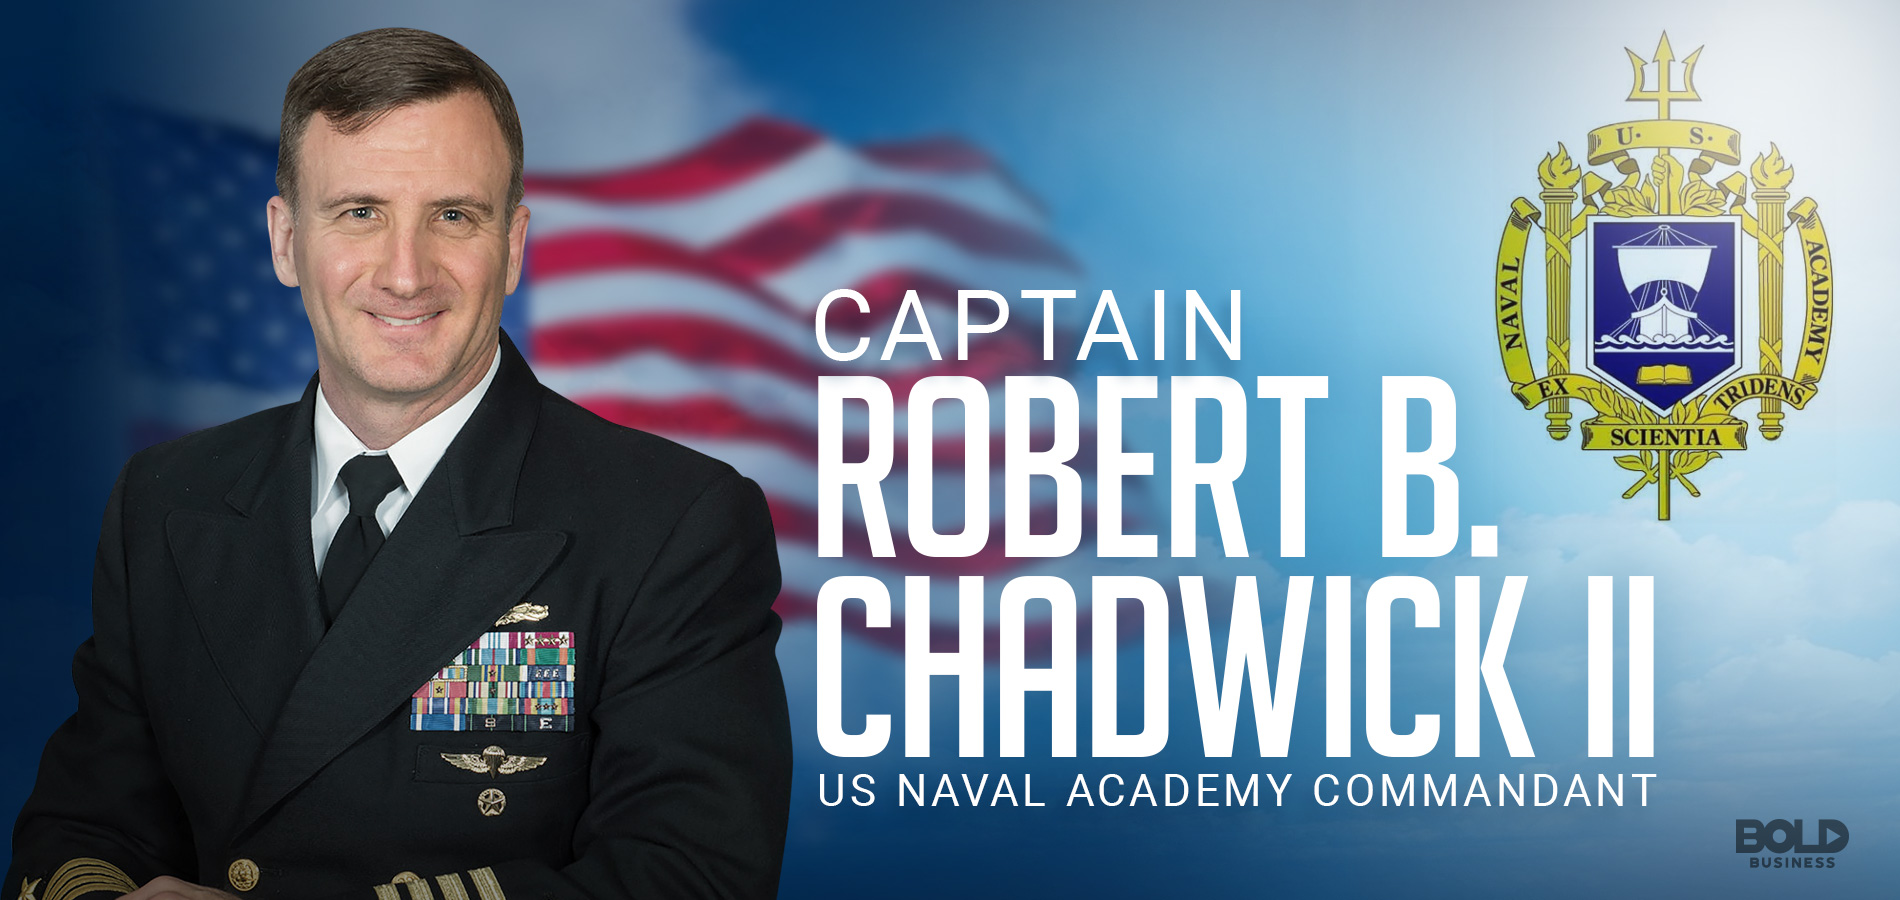 Captain Chadwick, naval academy commandant is a bold leader.